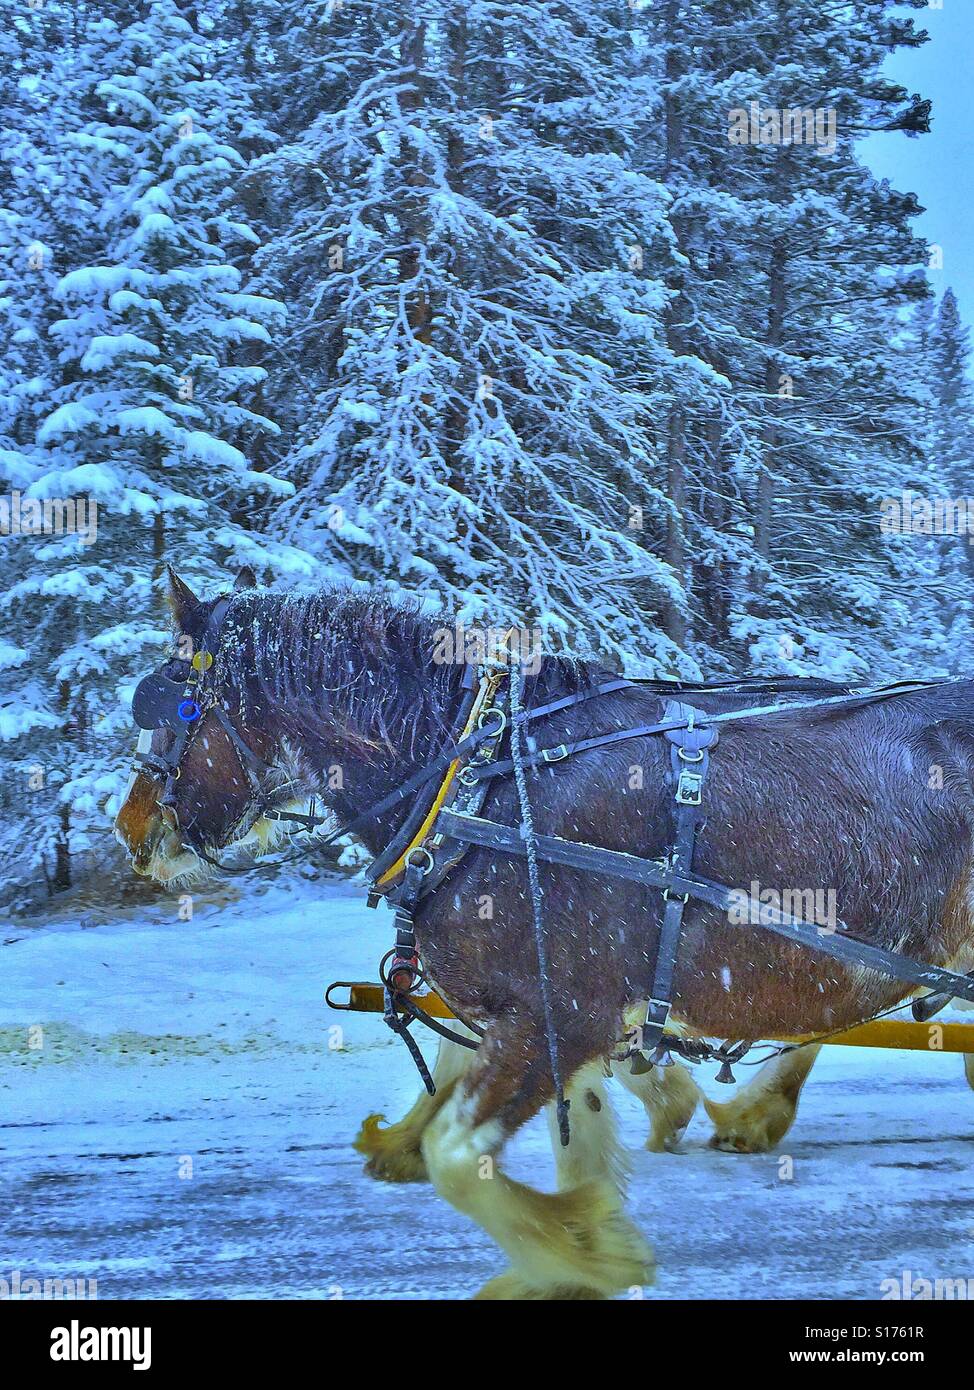 Team of work horses pulling a wagon on a snowy day Stock Photo